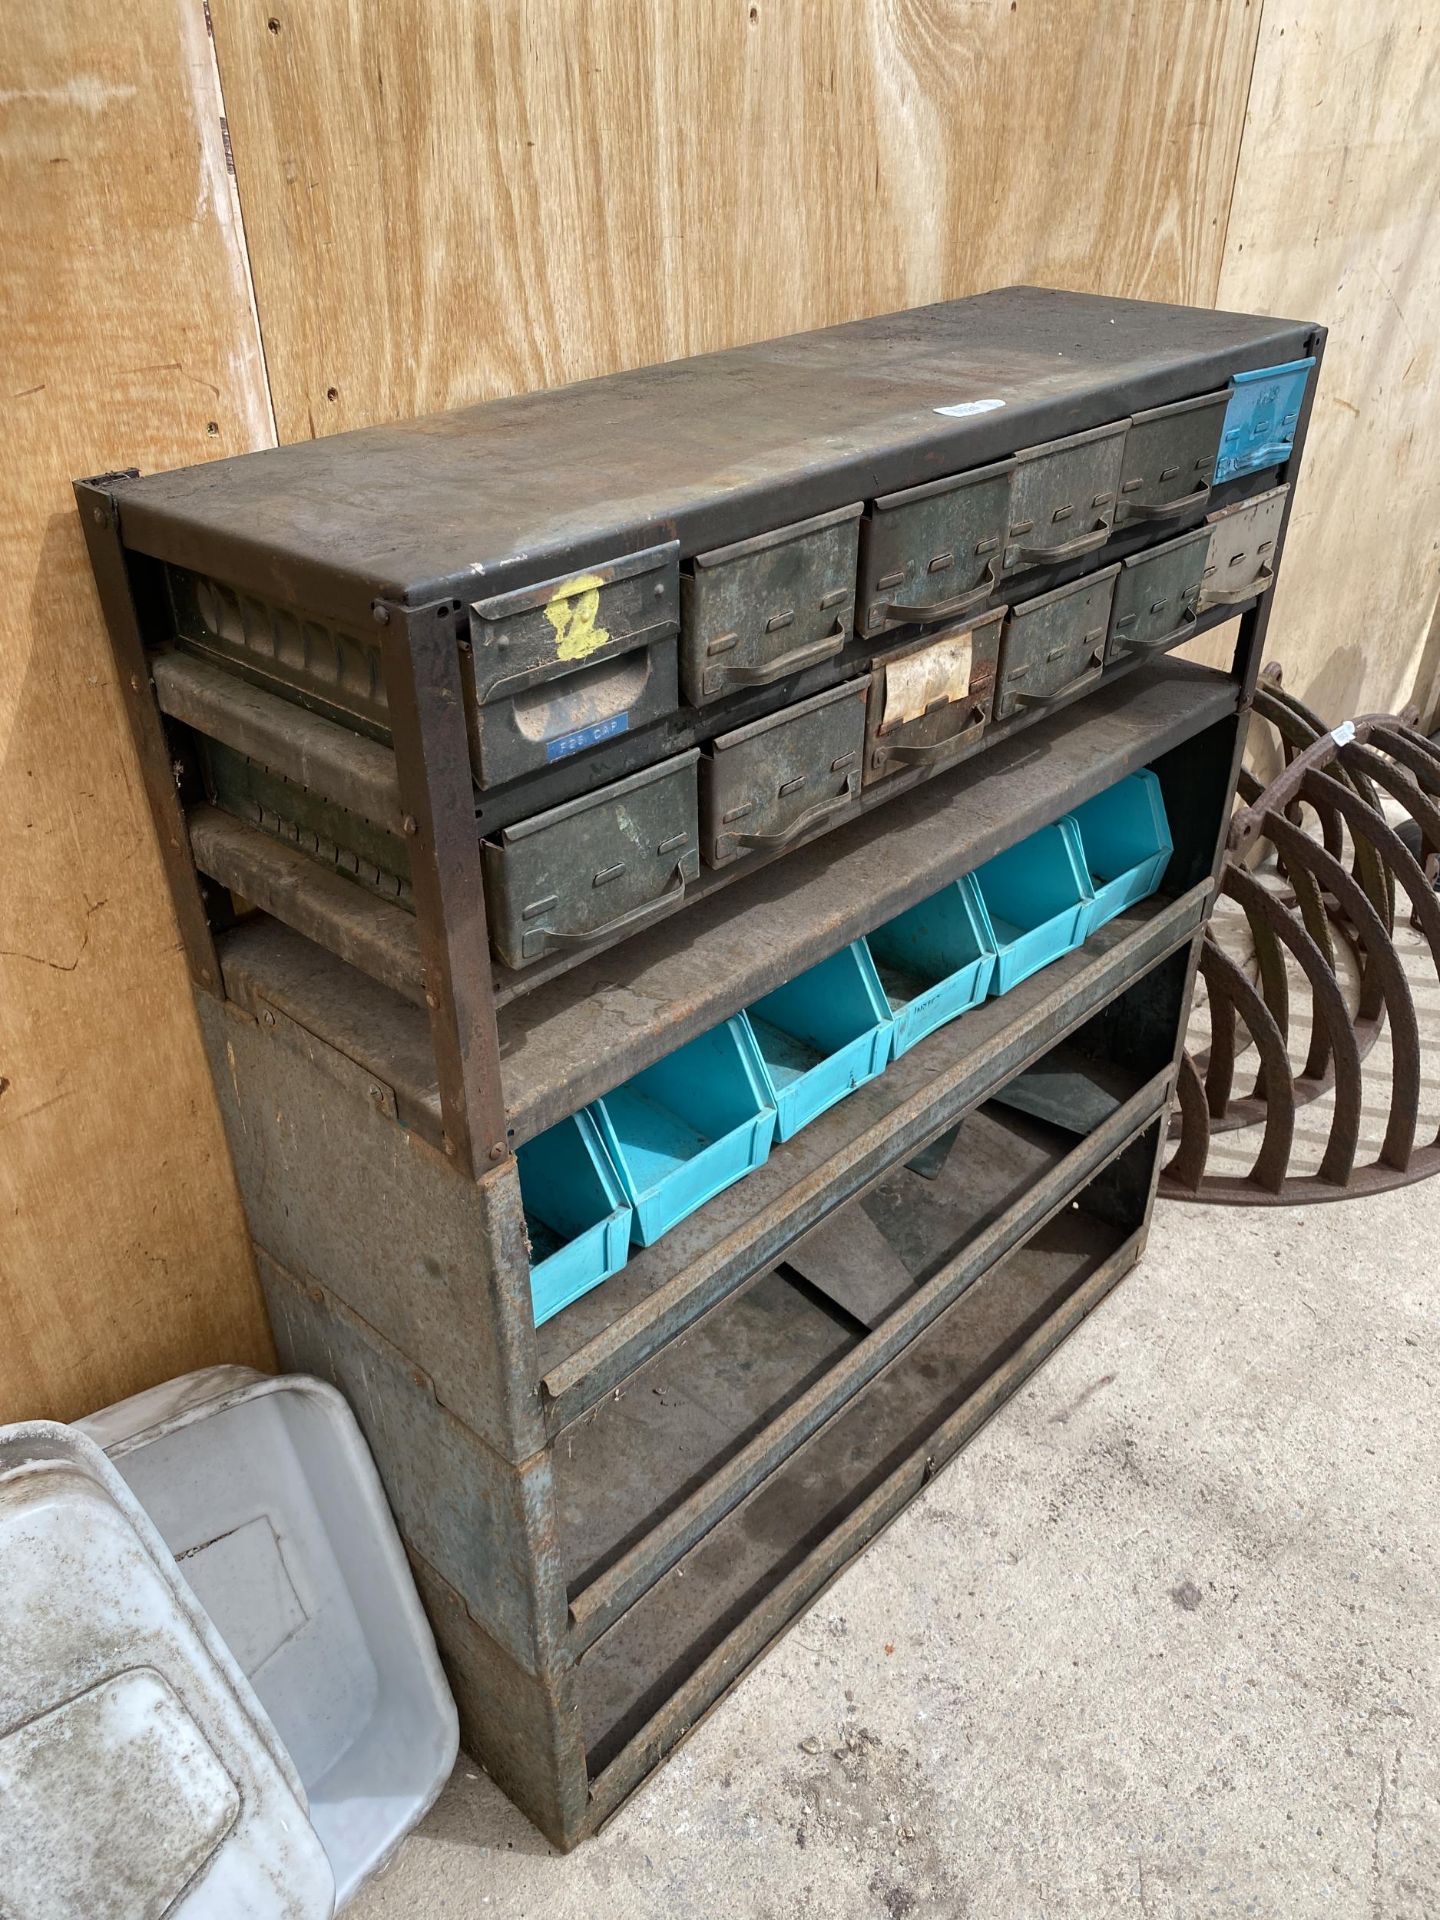 A VINTAGE TOOL STORAGE UNIT WITH UPPER INDIVIDUAL TRAY DRAWERS AND LOWER SHELVES - Bild 2 aus 6